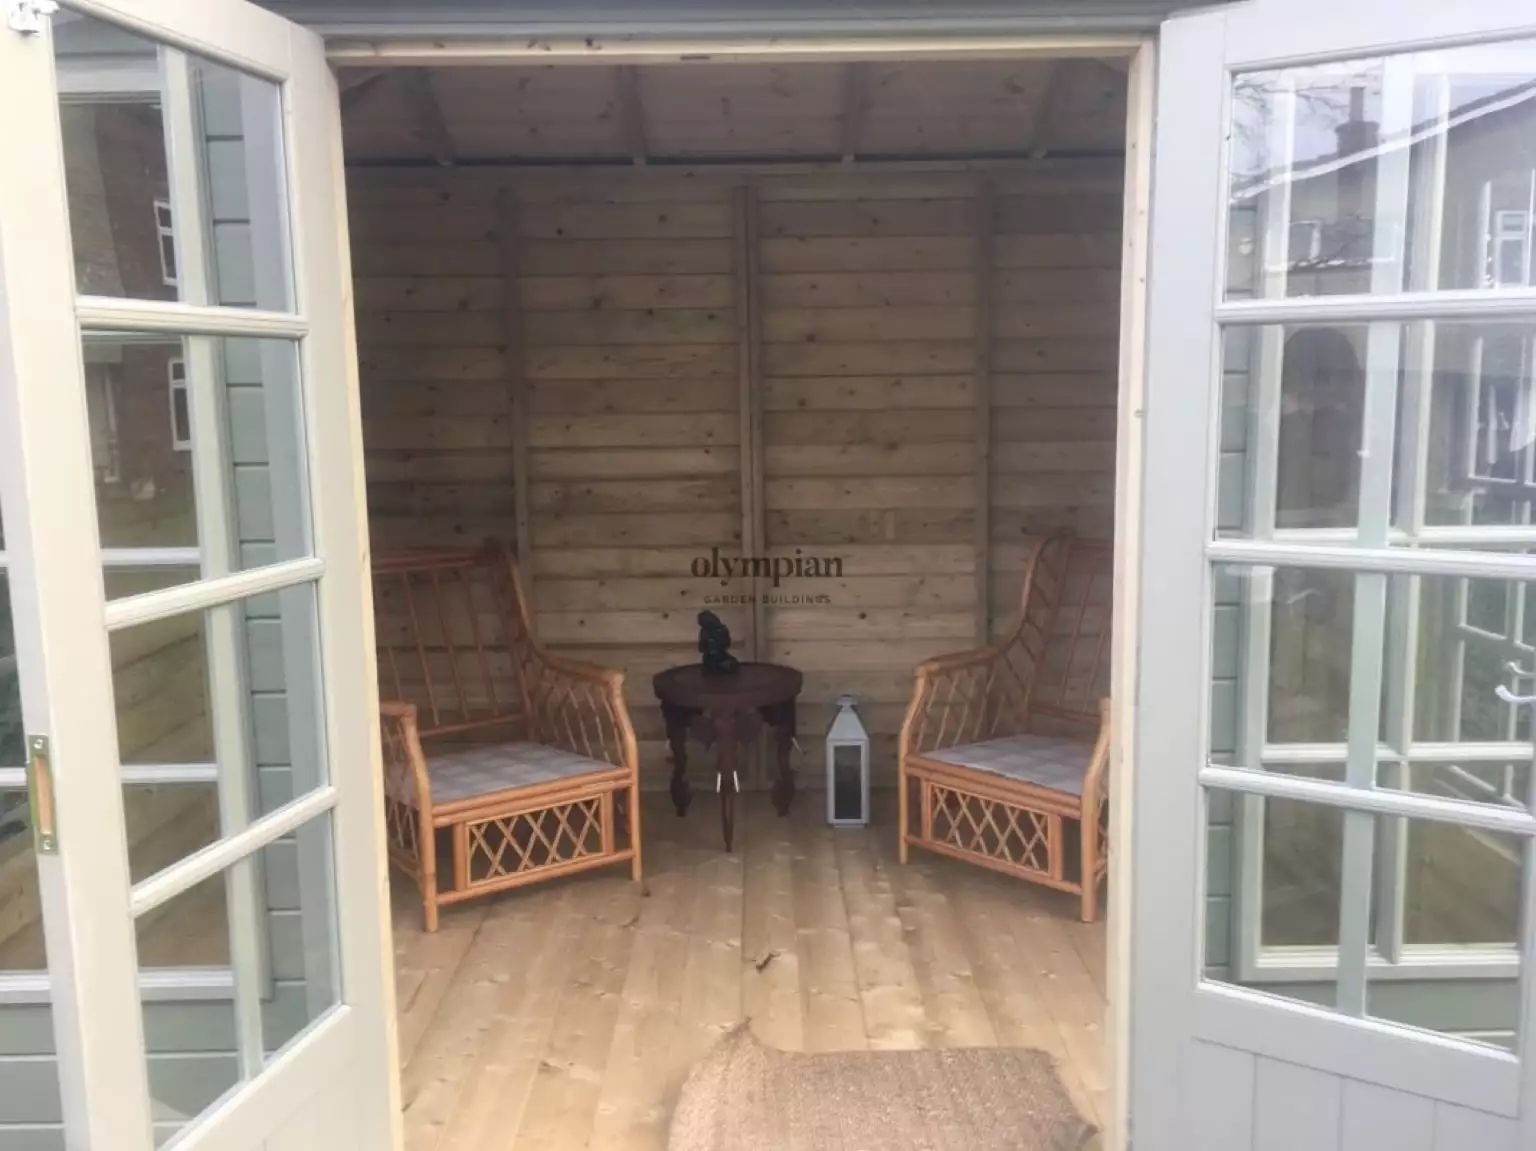 Internal view of painted hipped roof summerhouse with cedar shingles